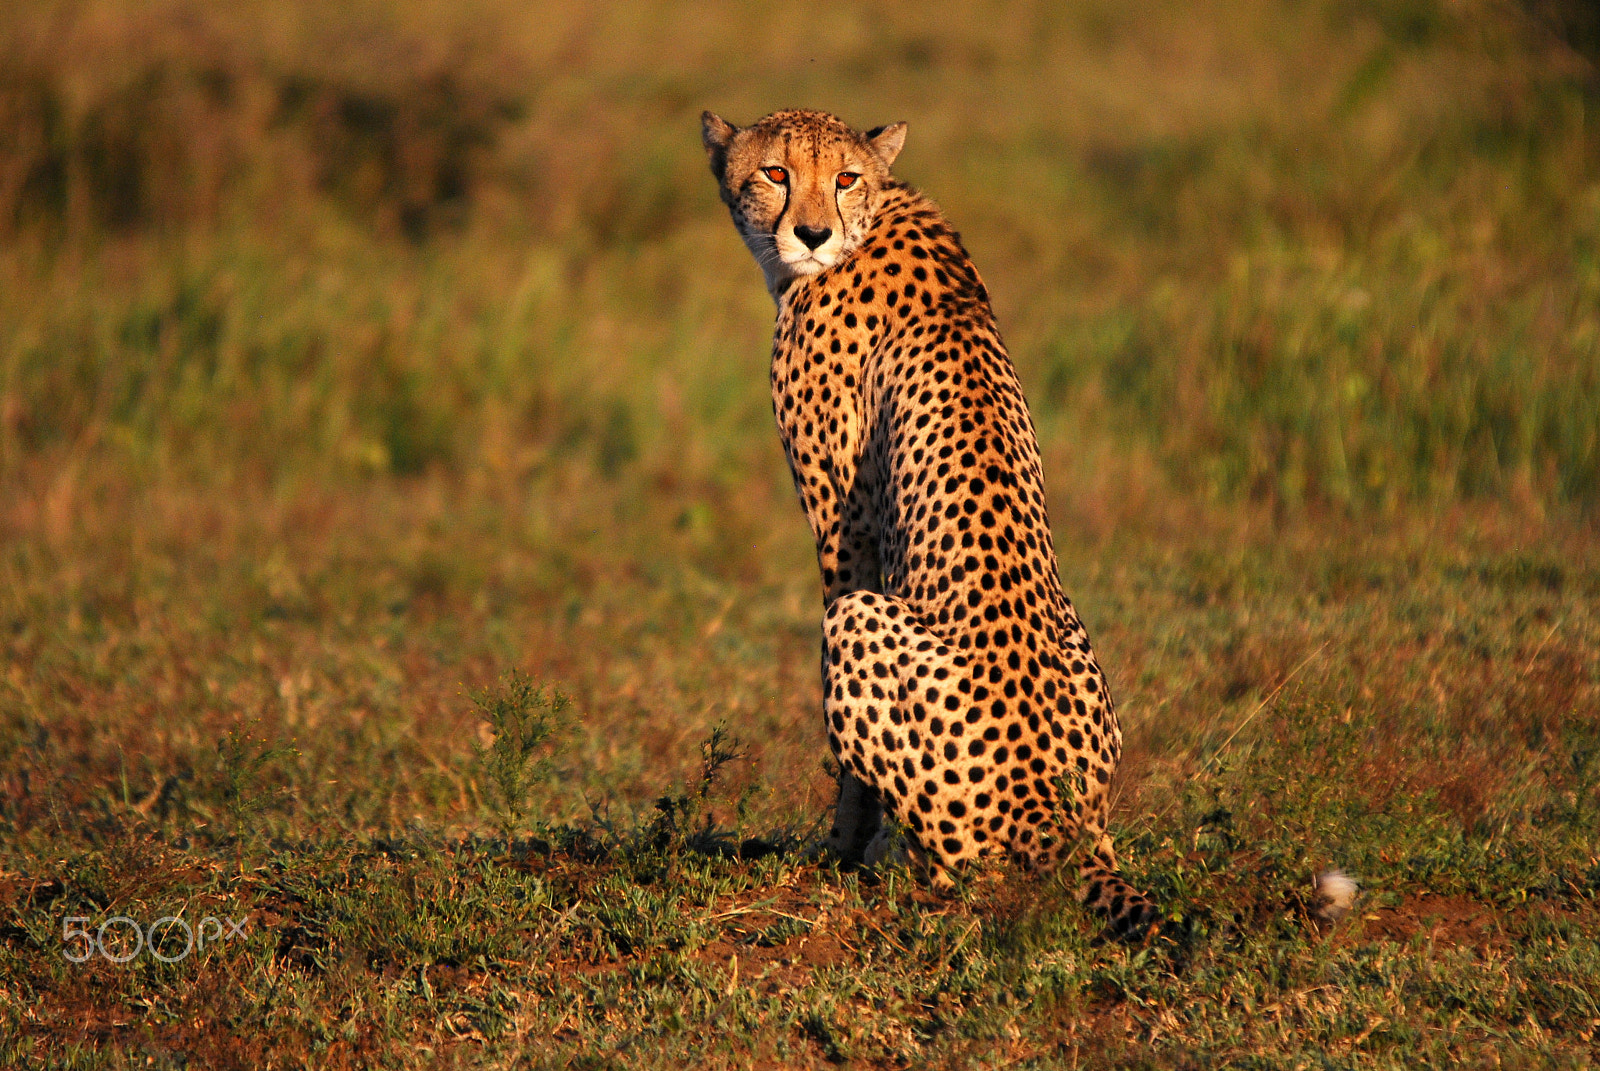 Nikon D80 sample photo. Adult female cheetah in game reserve photography